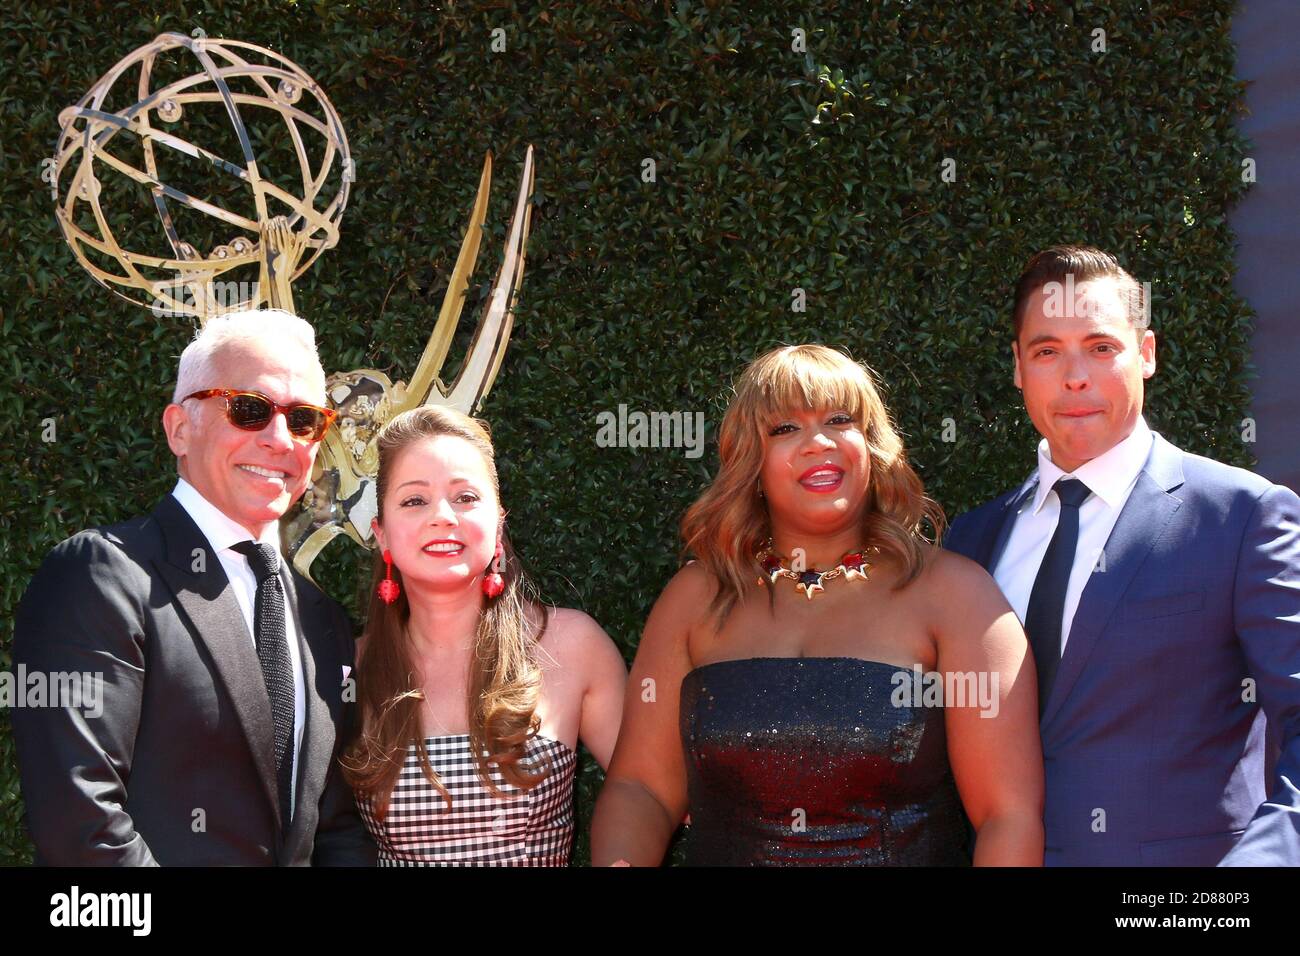 LOS ANGELES - APR 30:  The Kitchen, Geoffrey Zakarian, Marcela Valladolid, Sunny Anderson, Jeff Mauro at the 44th Daytime Emmy Awards - Arrivals at the Pasadena Civic Auditorium on April 30, 2017 in Pasadena, CA Stock Photo